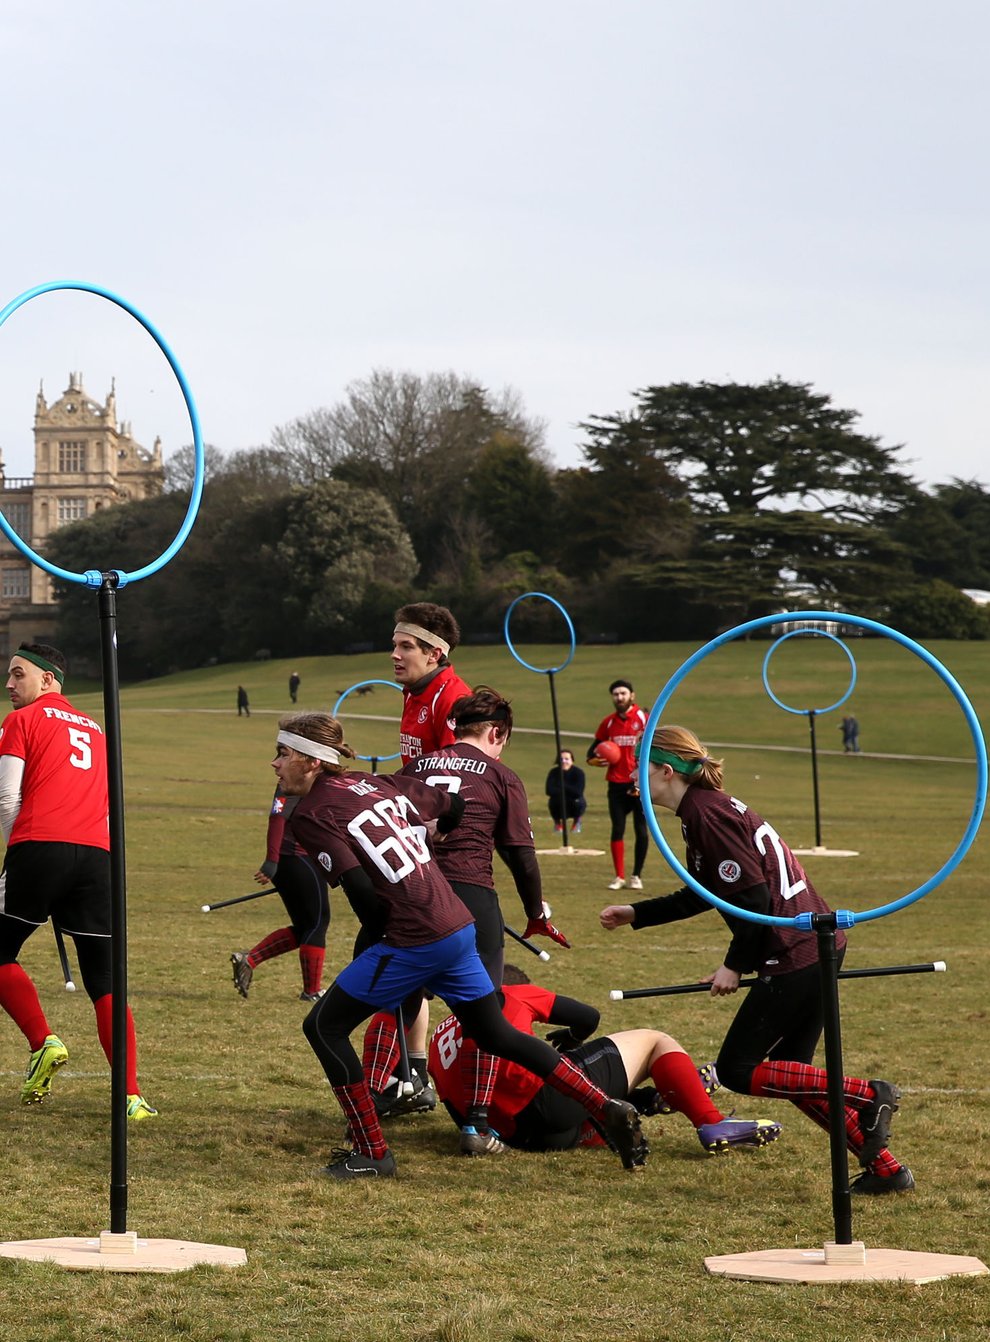 Match action between Southampton and Loughborough Longshots during the UK Quidditch Cup (Simon Cooper/PA)